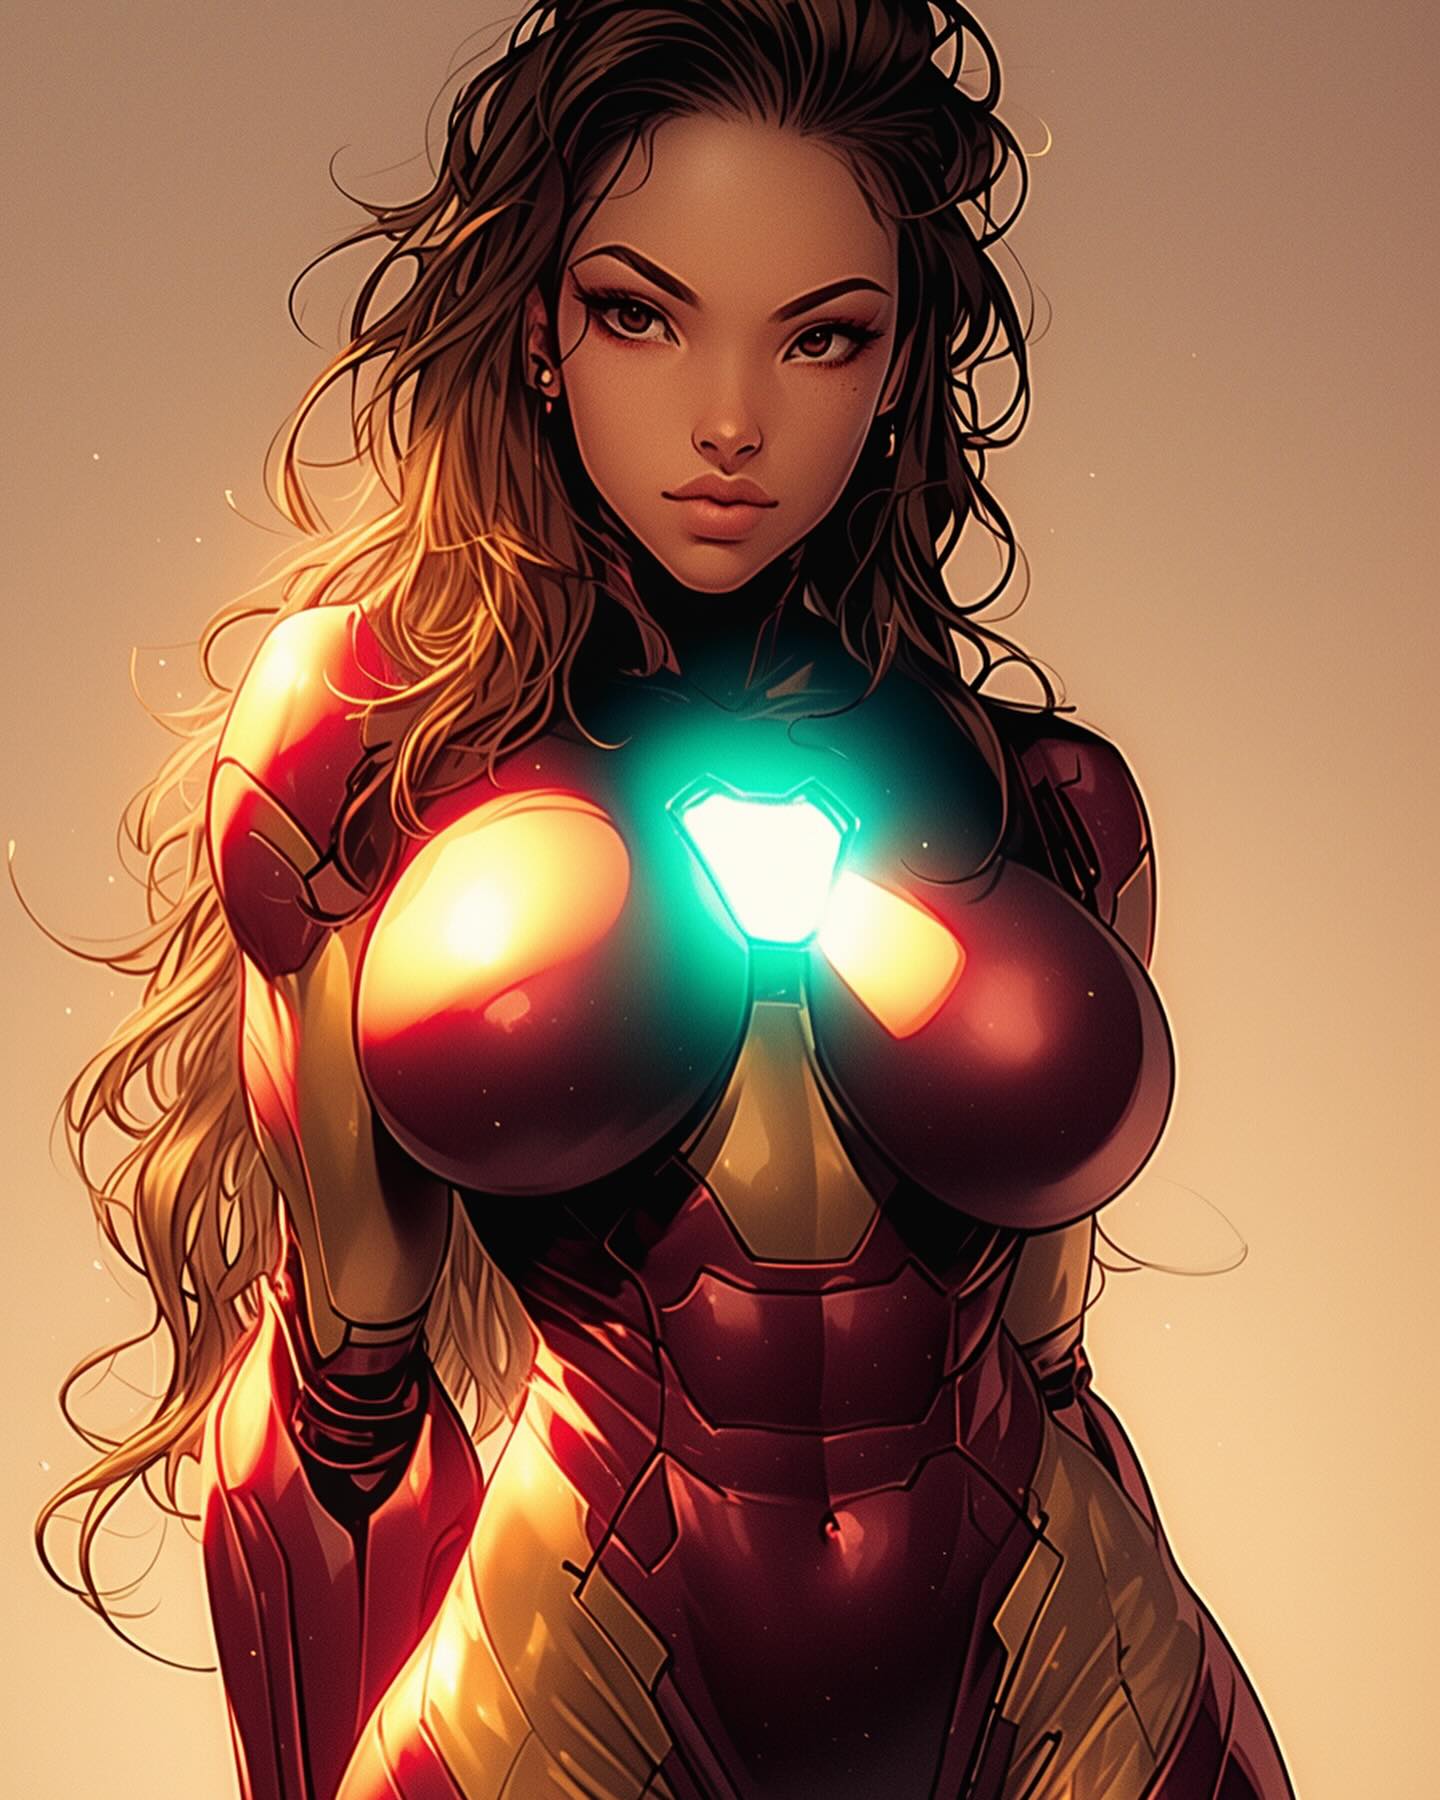 Ironheart by-432939639_17968302218705826_5383033748697447898_n 